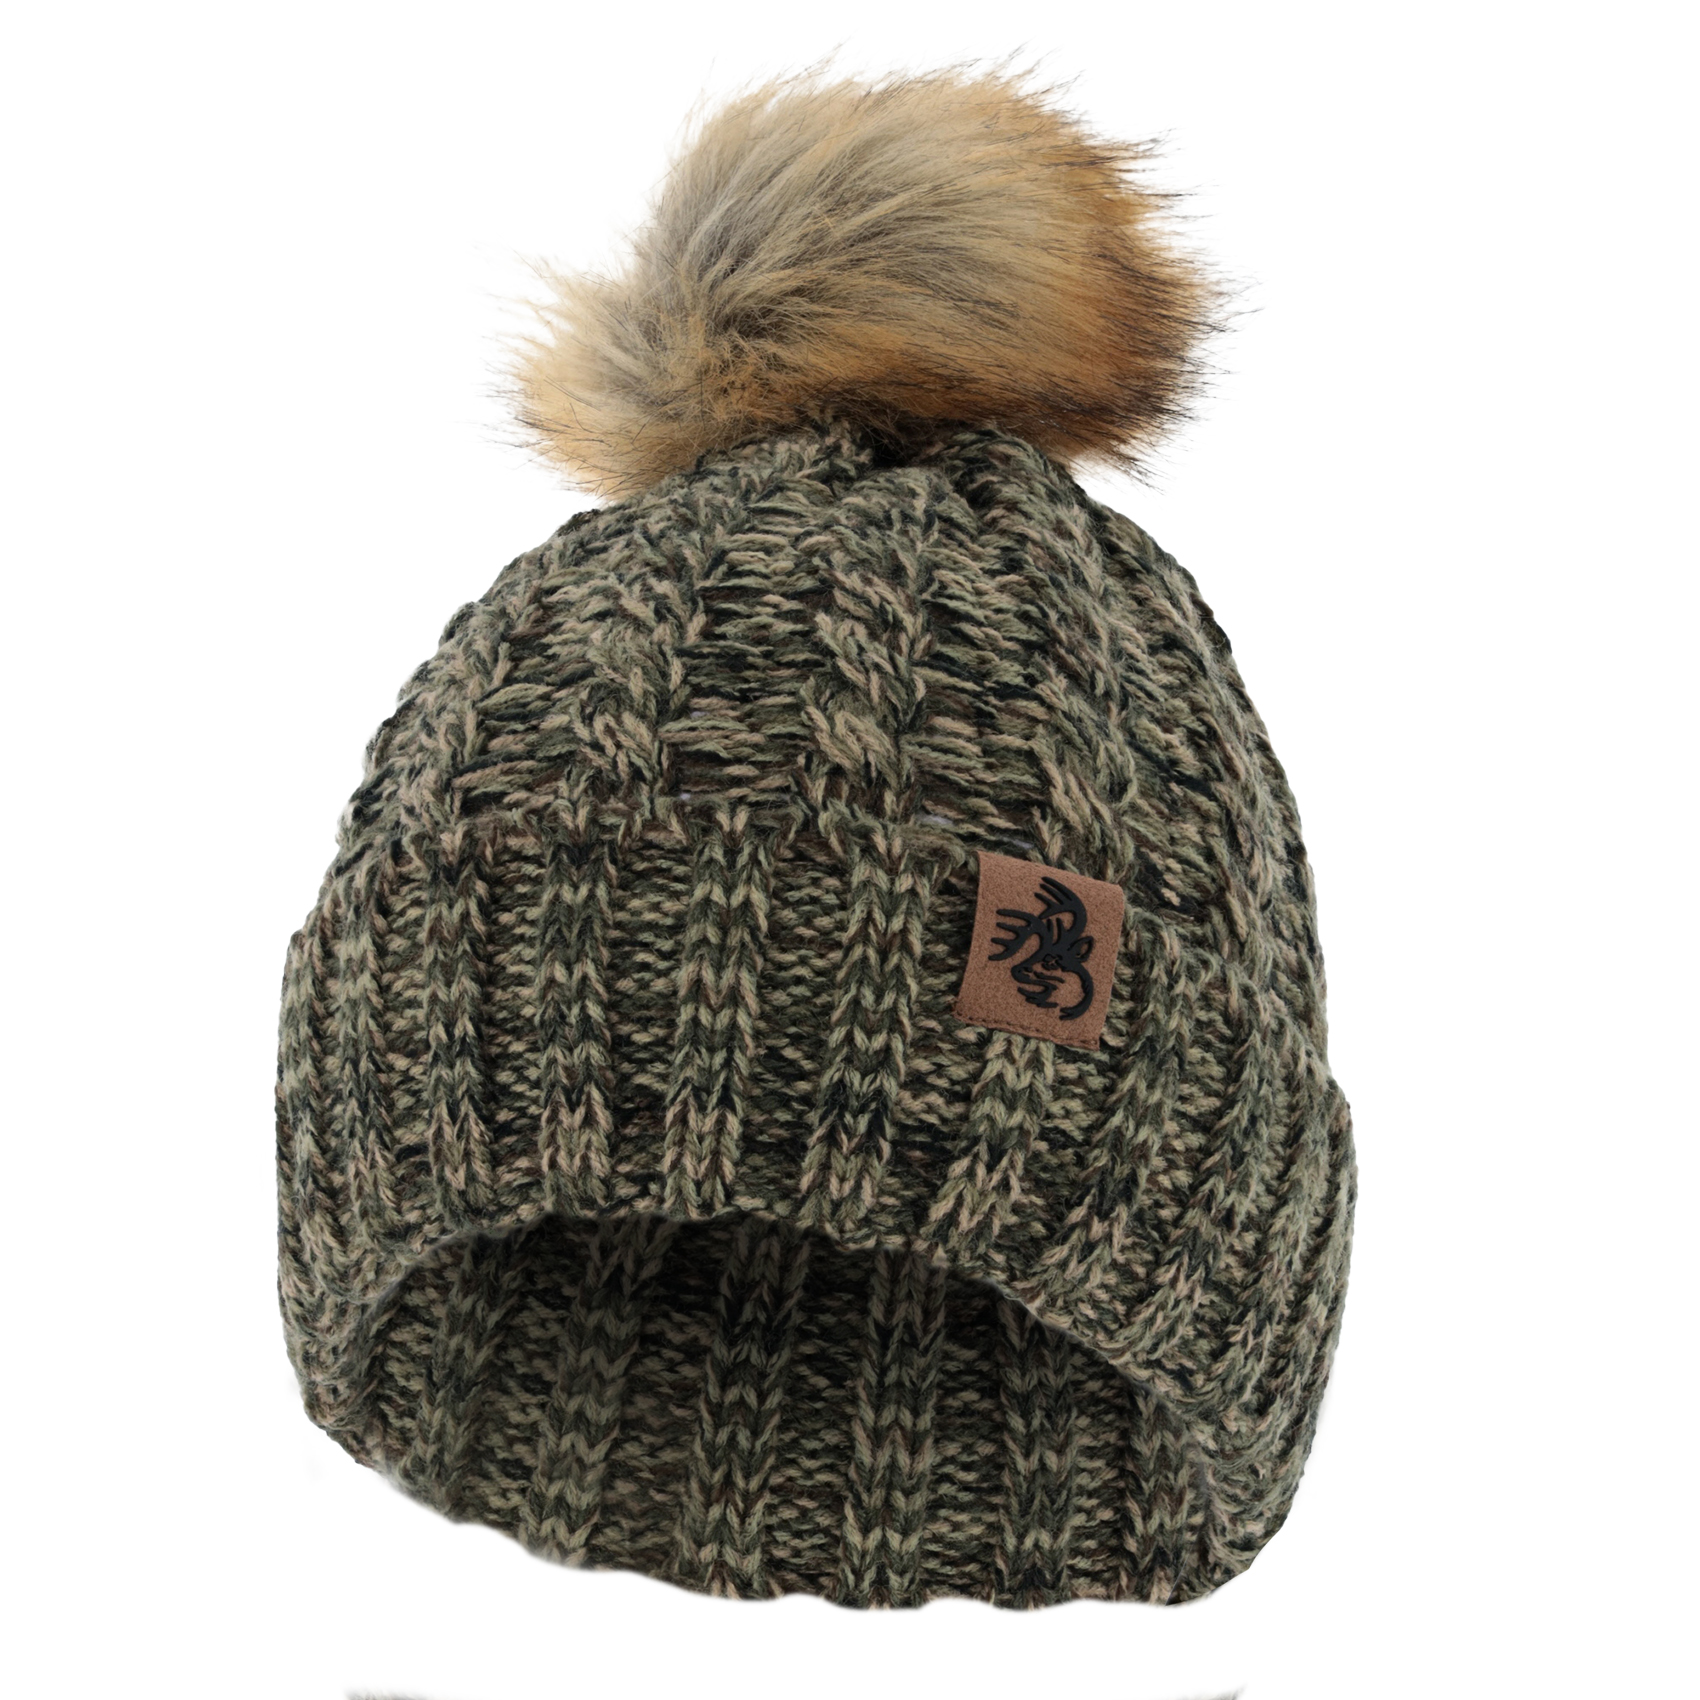 The Northwoods Trapper Hat